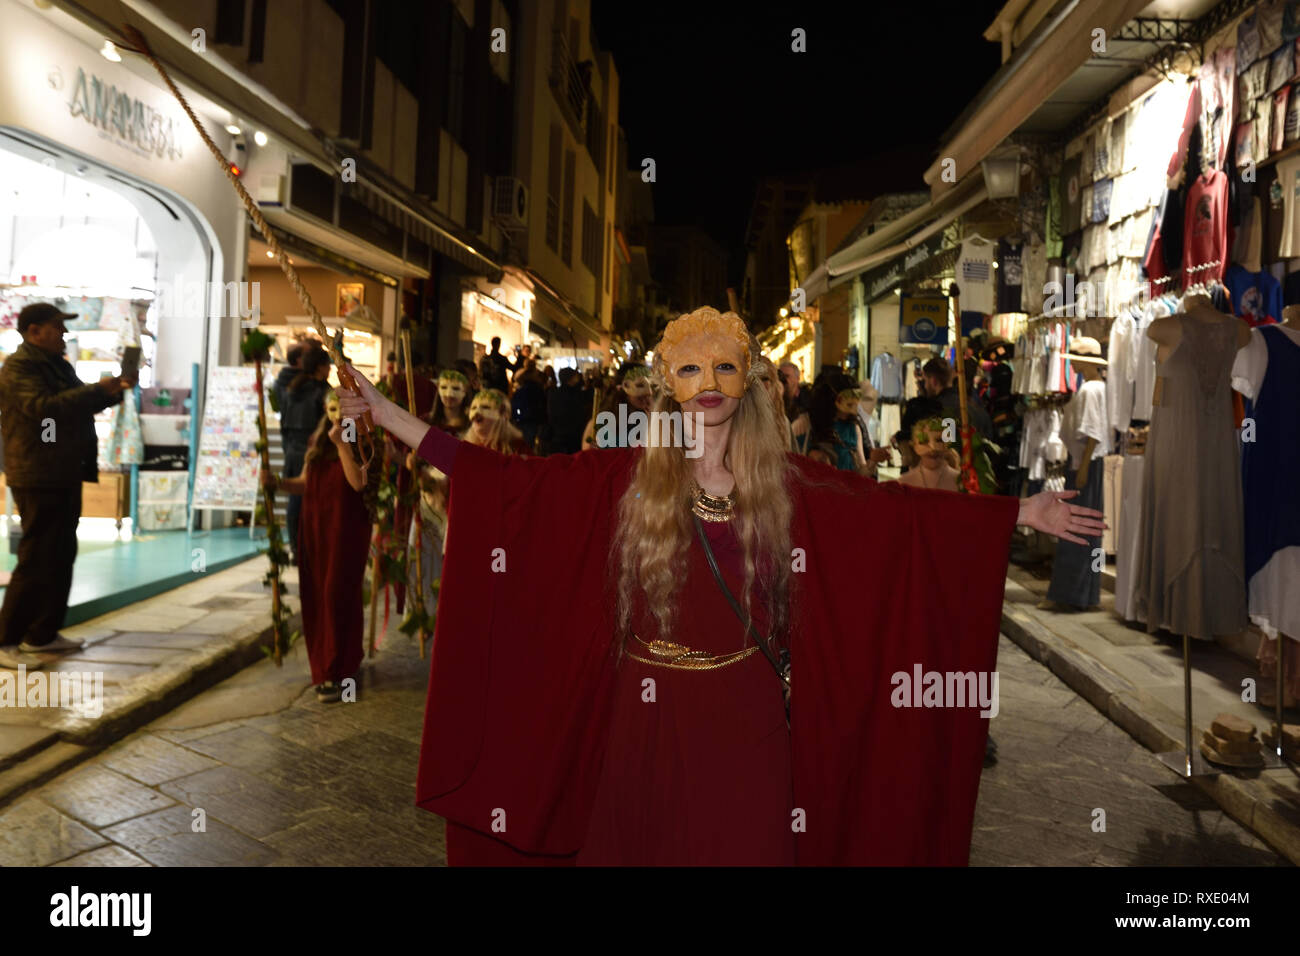 Athens, Greece. 9th Mar 2019. Participants march through the historic center of Athens to celebrate the ancient Greek festival phalliphoria honoring the god of wine, fertility and theater Dionysus in Athens, Greece. Credit: Nicolas Koutsokostas/Alamy Live News. Stock Photo